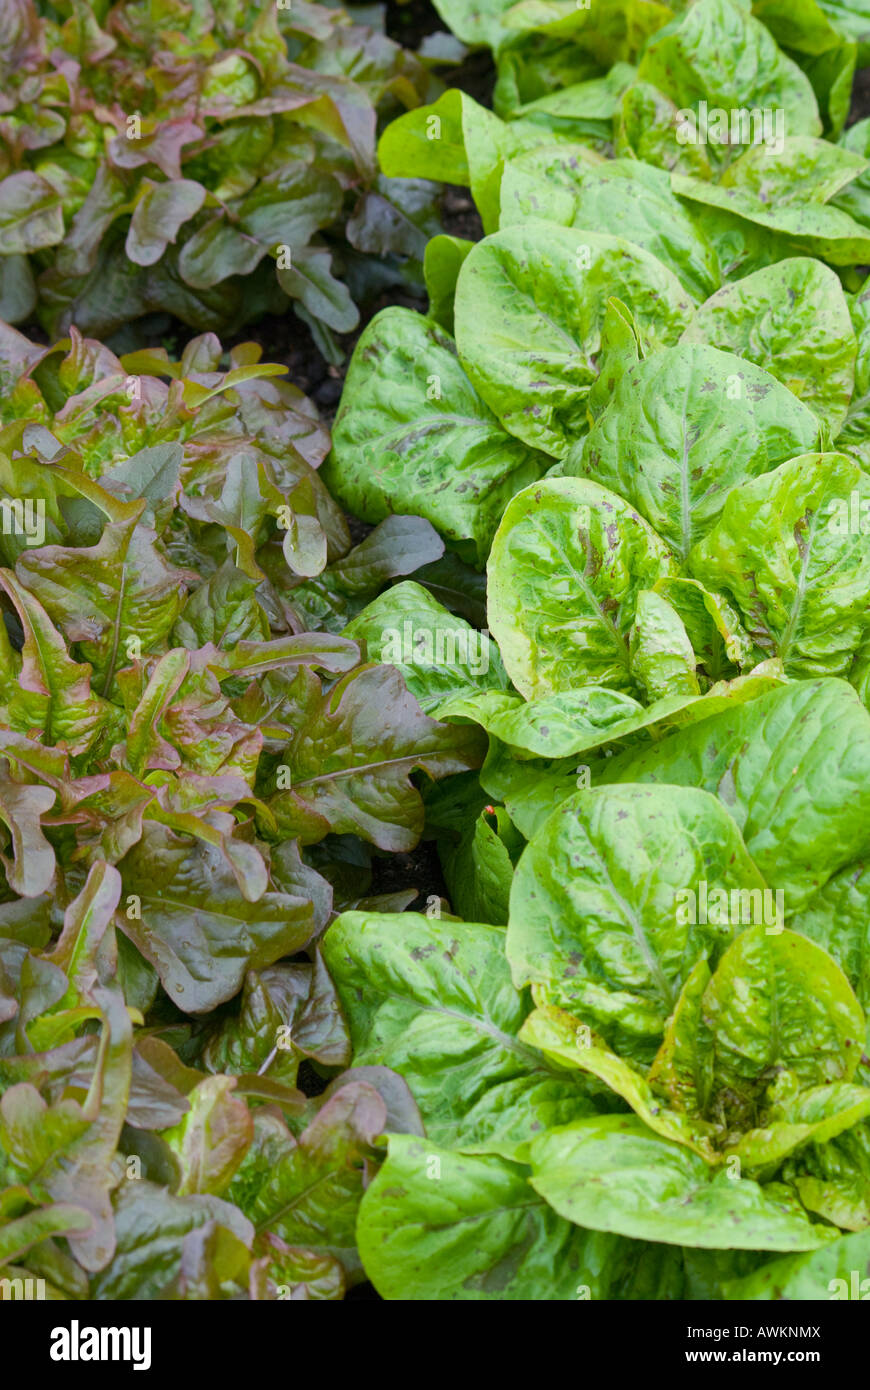 Two varieties of lettuce Stock Photo